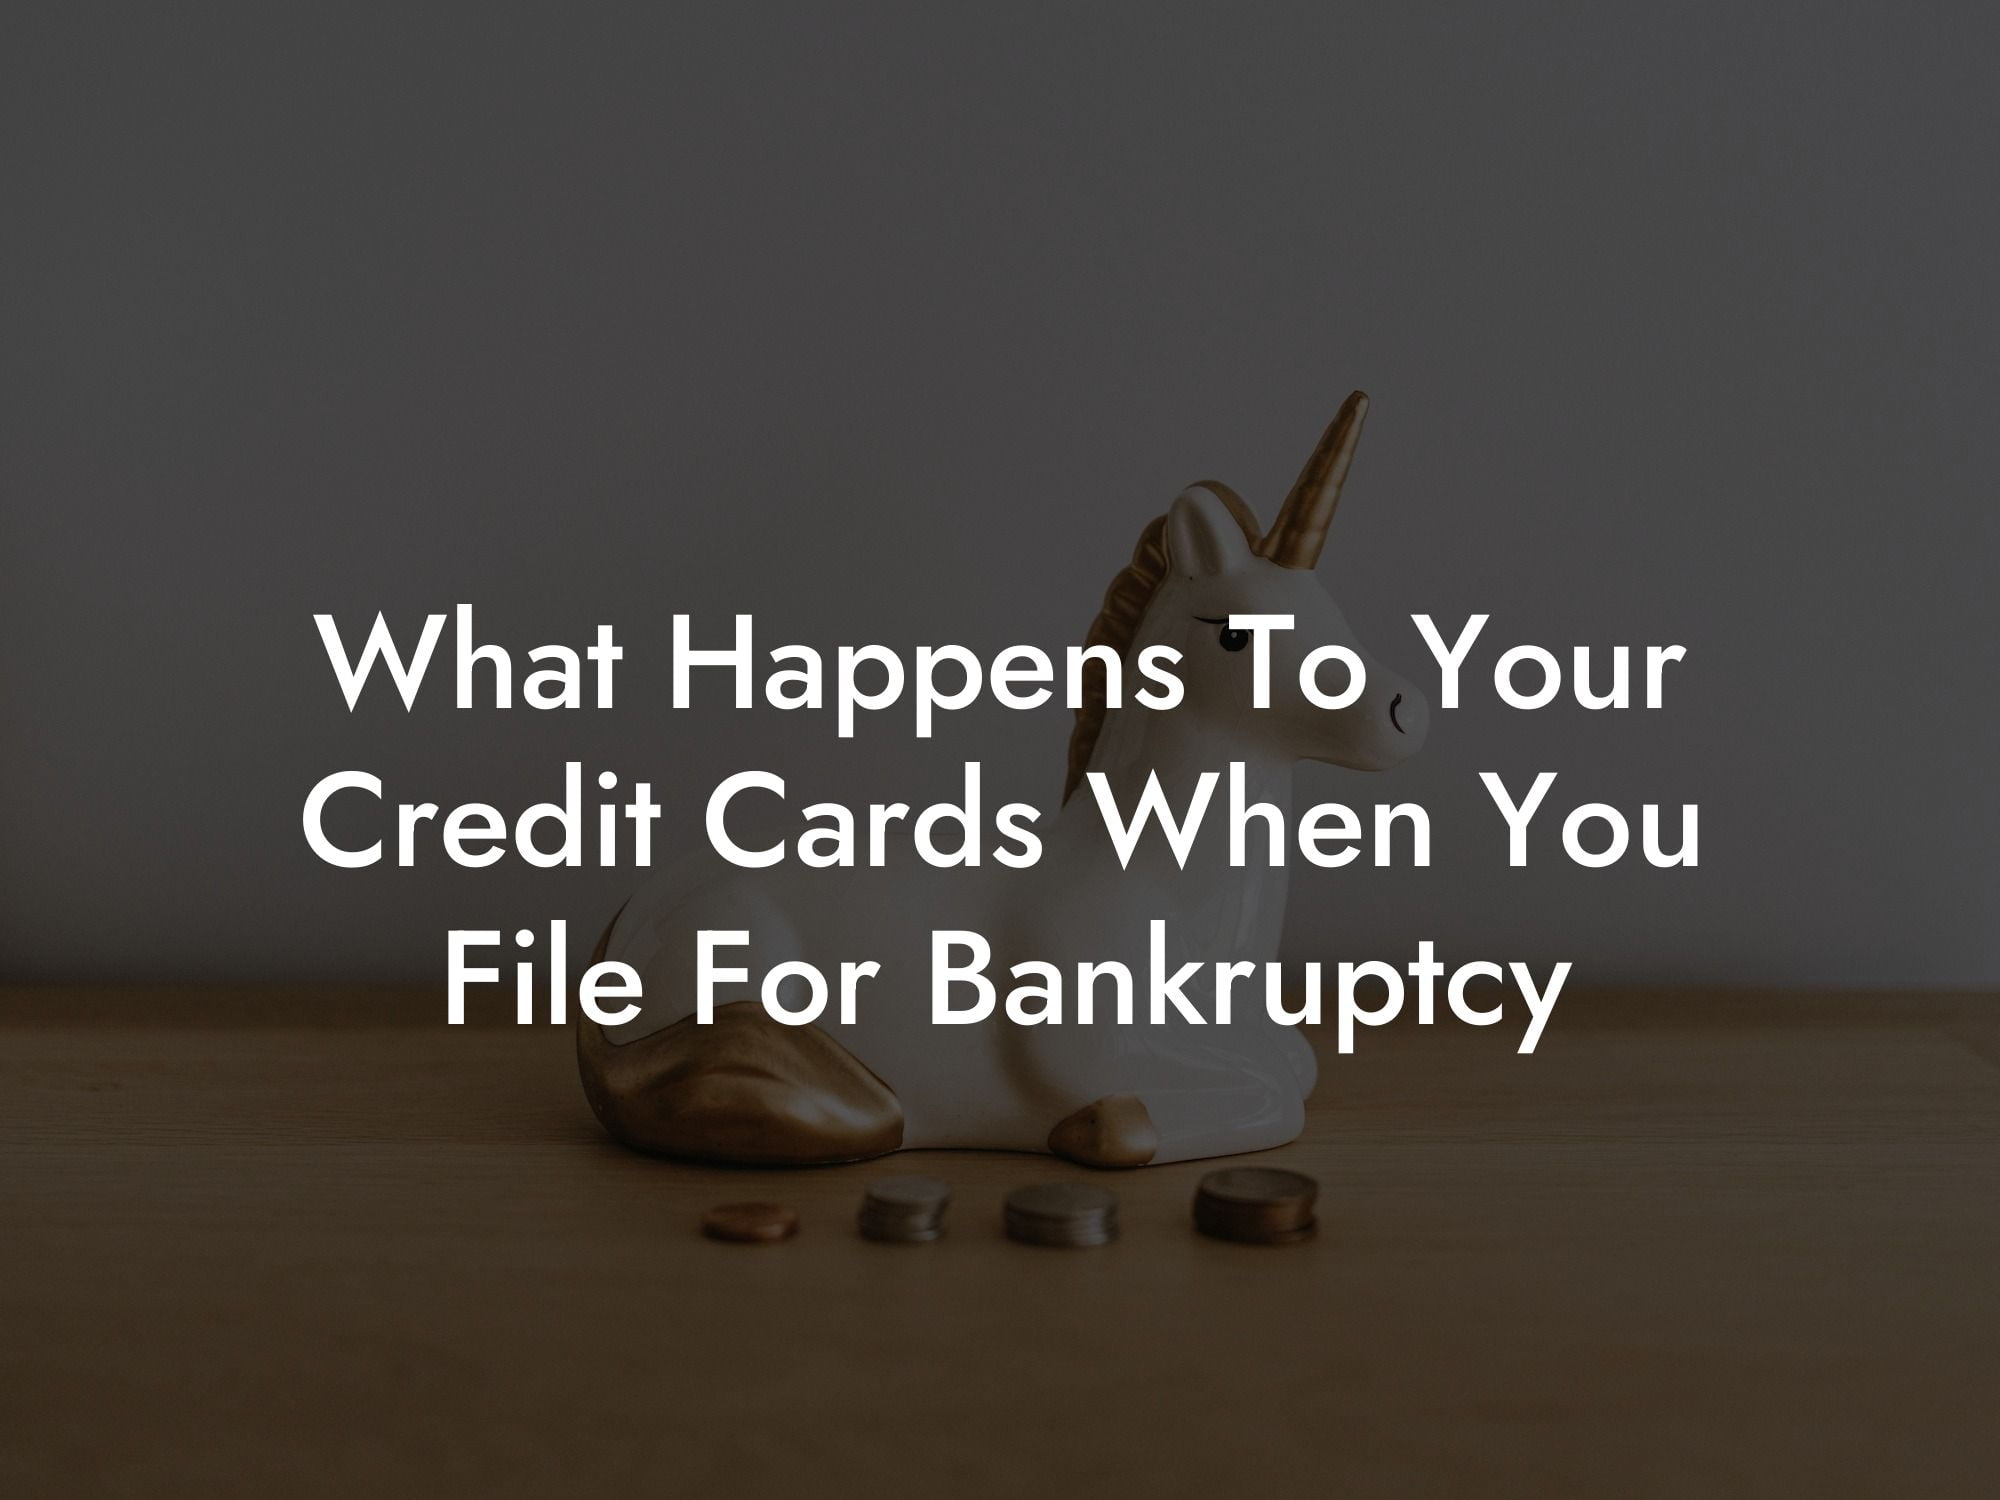 What Happens To Your Credit Cards When You File For Bankruptcy